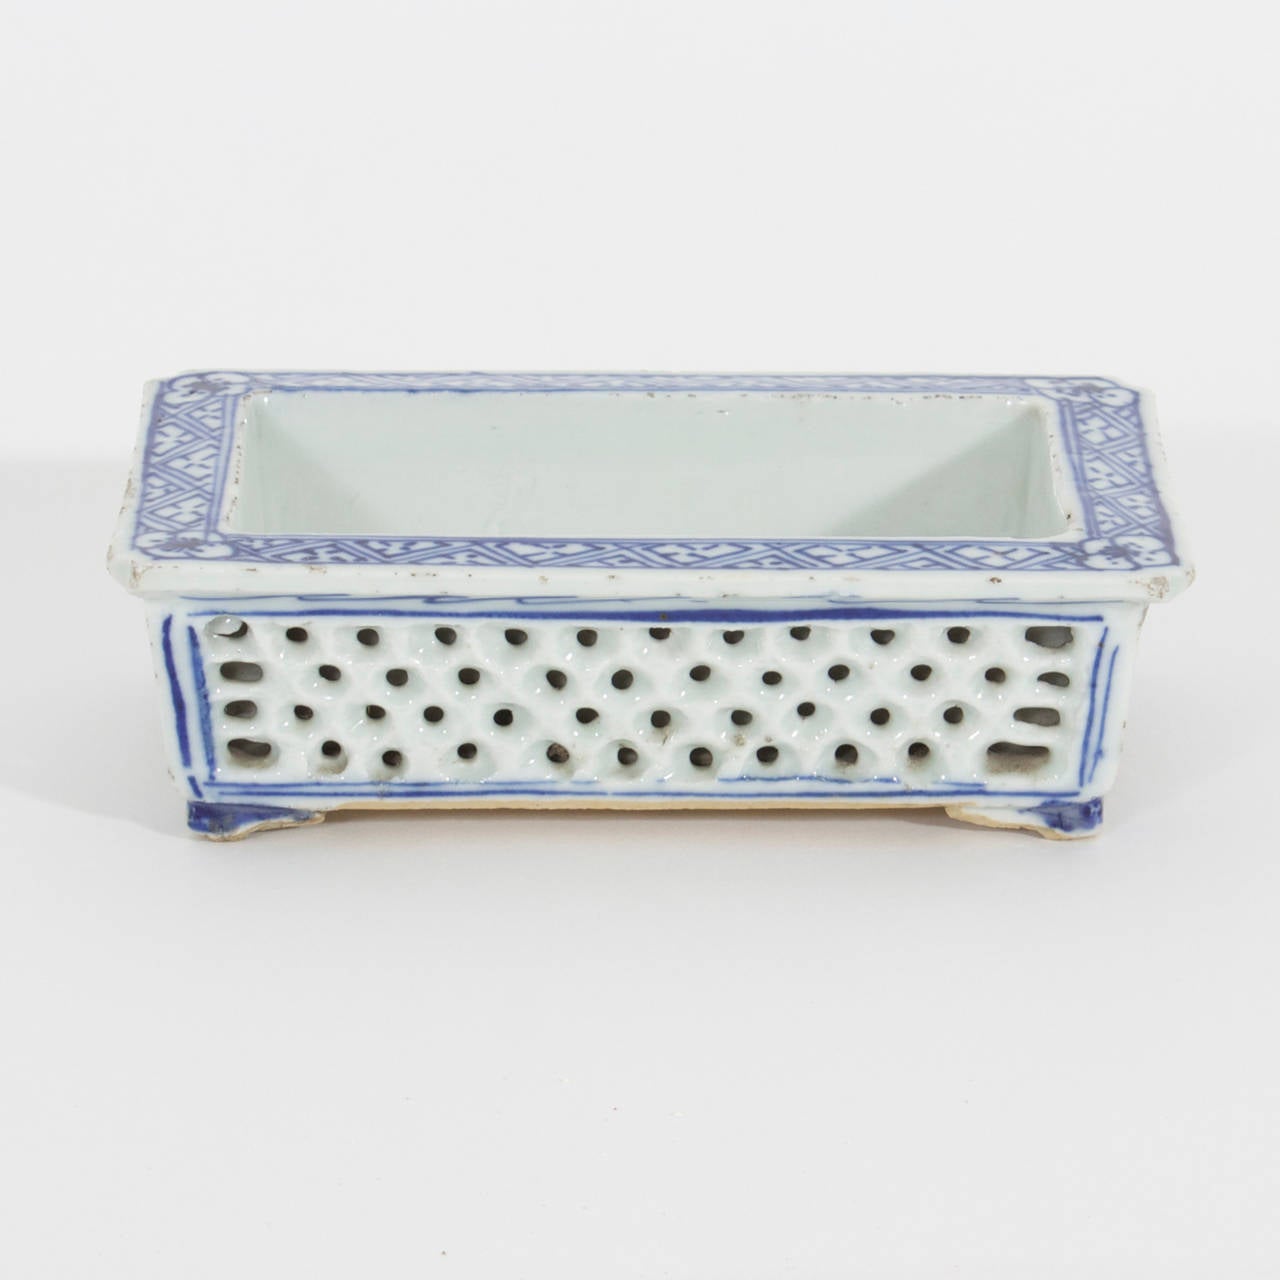 A sweet gem of a 19th C. or older Chinese Export blue and white porcelain  narcissus tray, raised on small feet. Rustic, with floral decoration, and reticulated sides. Nice size and well used.

